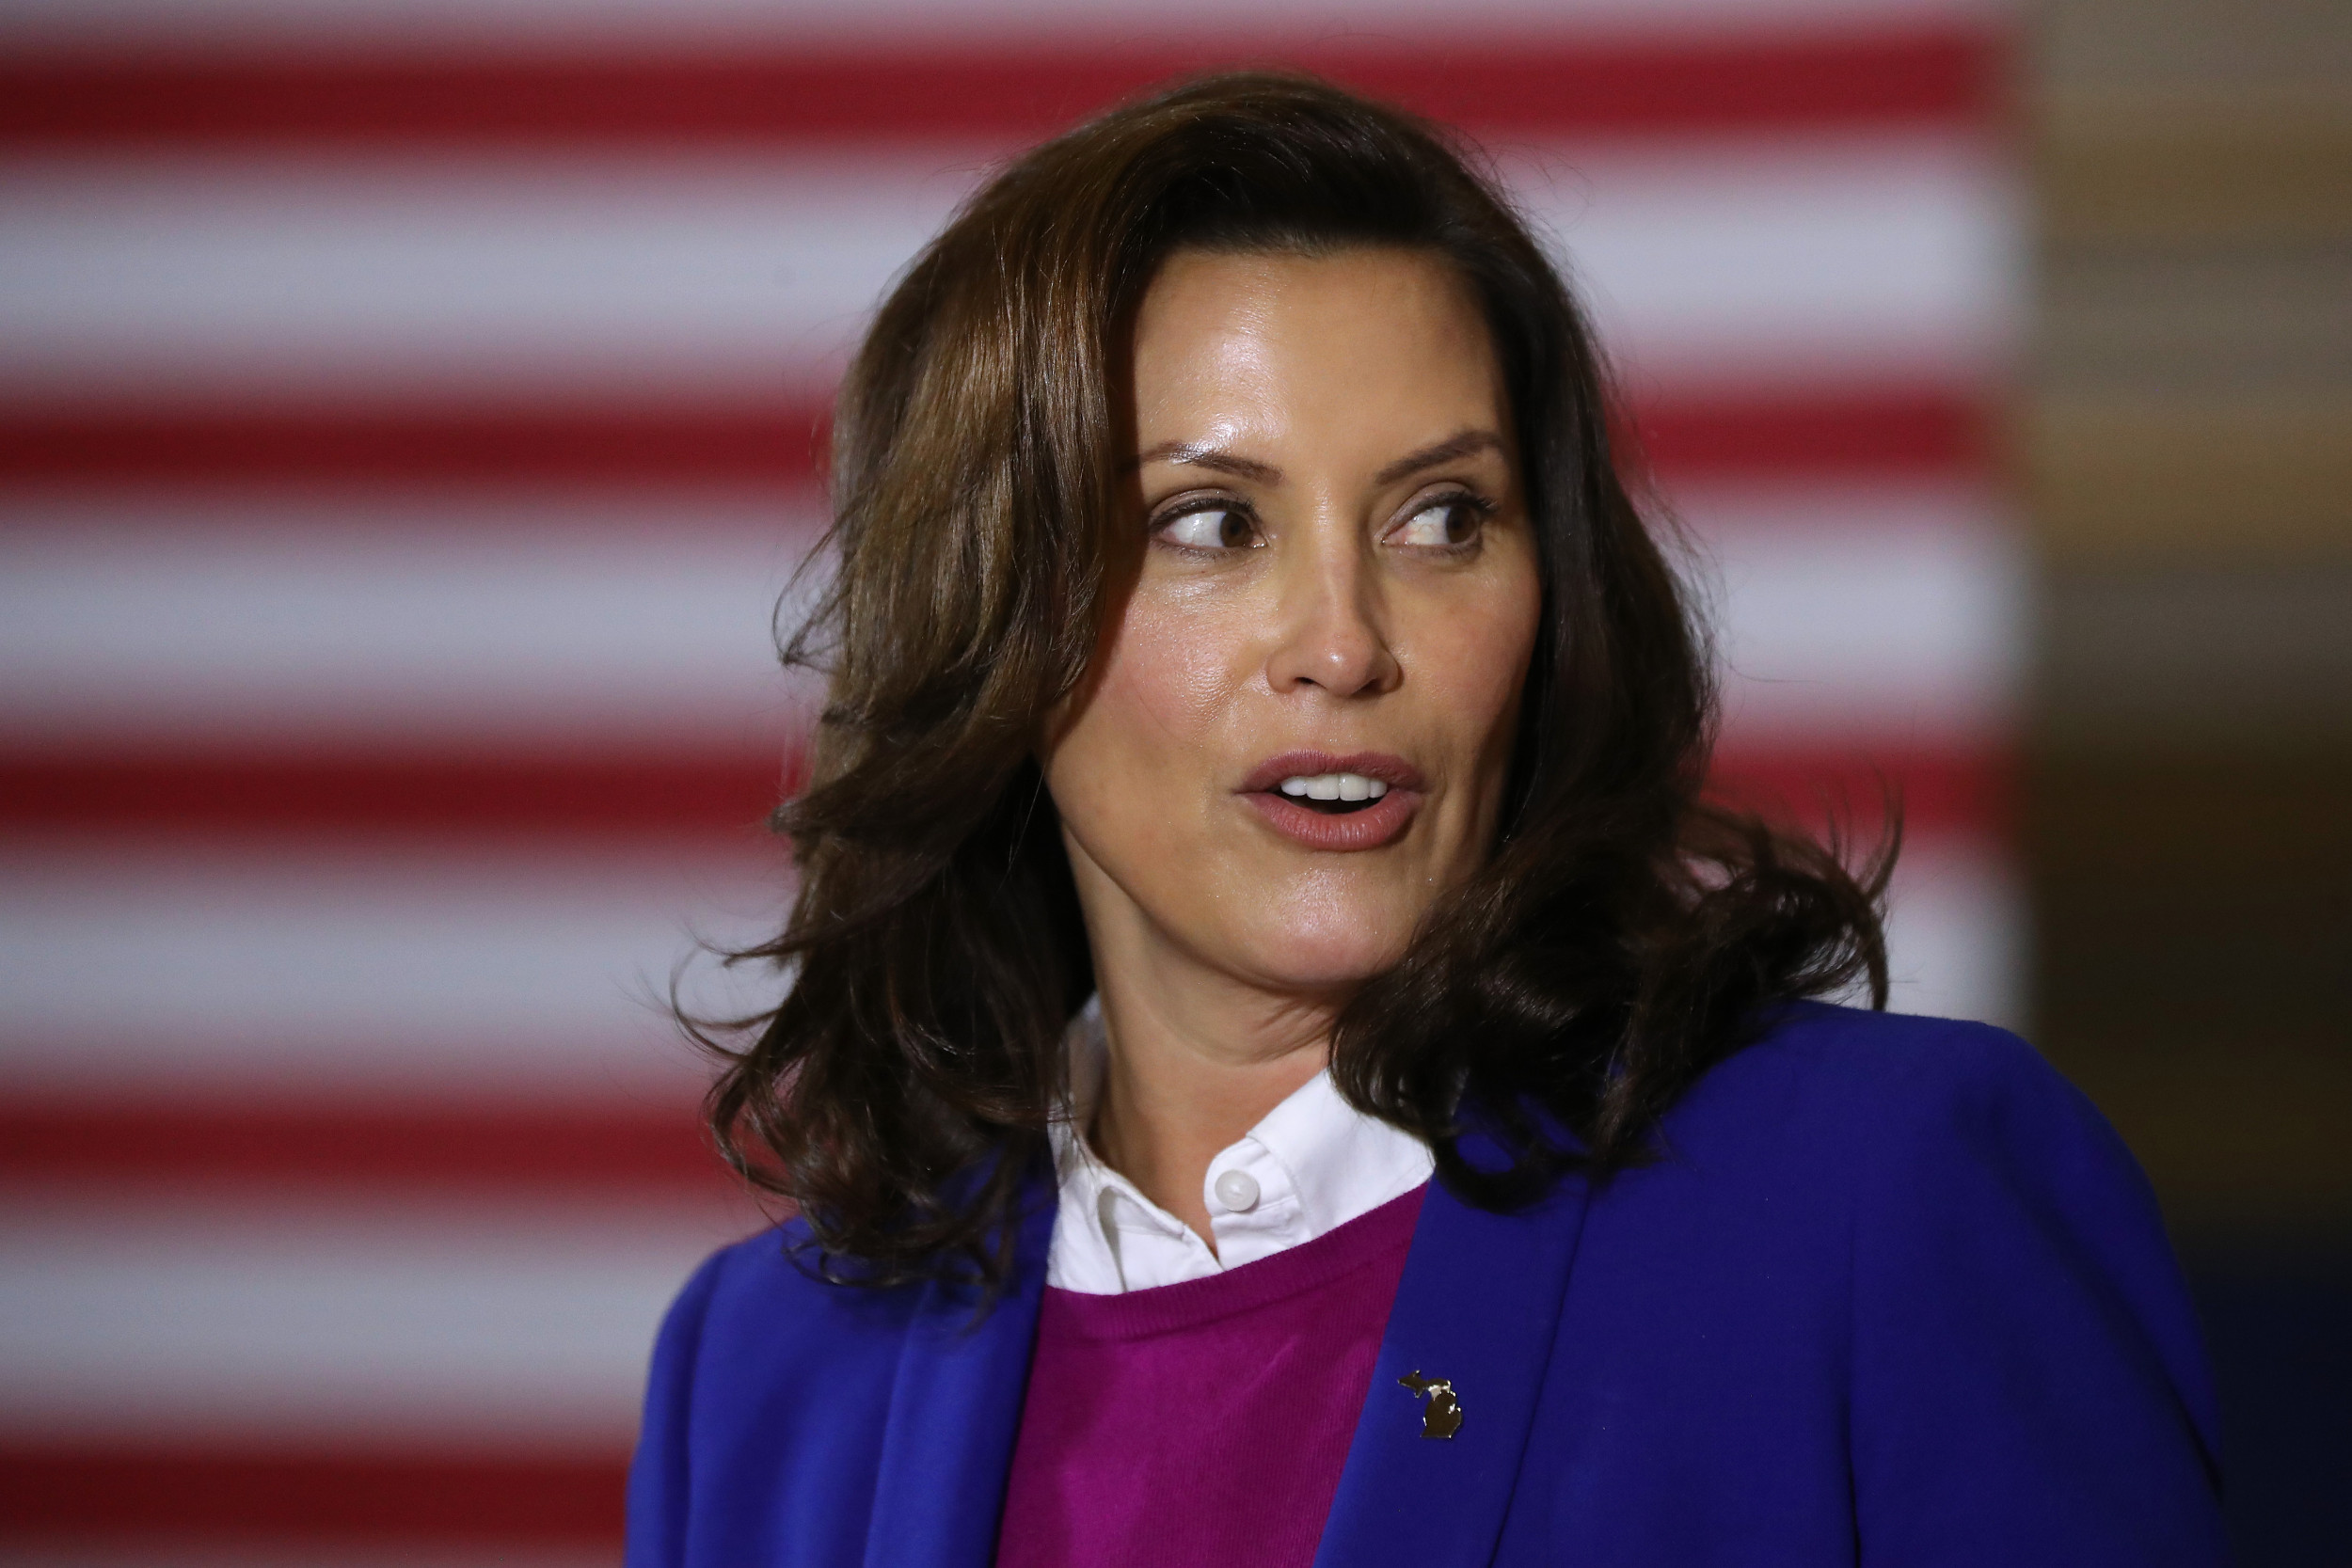 jury-deliberates-over-kidnapping-plot-against-governor-gretchen-whitmer